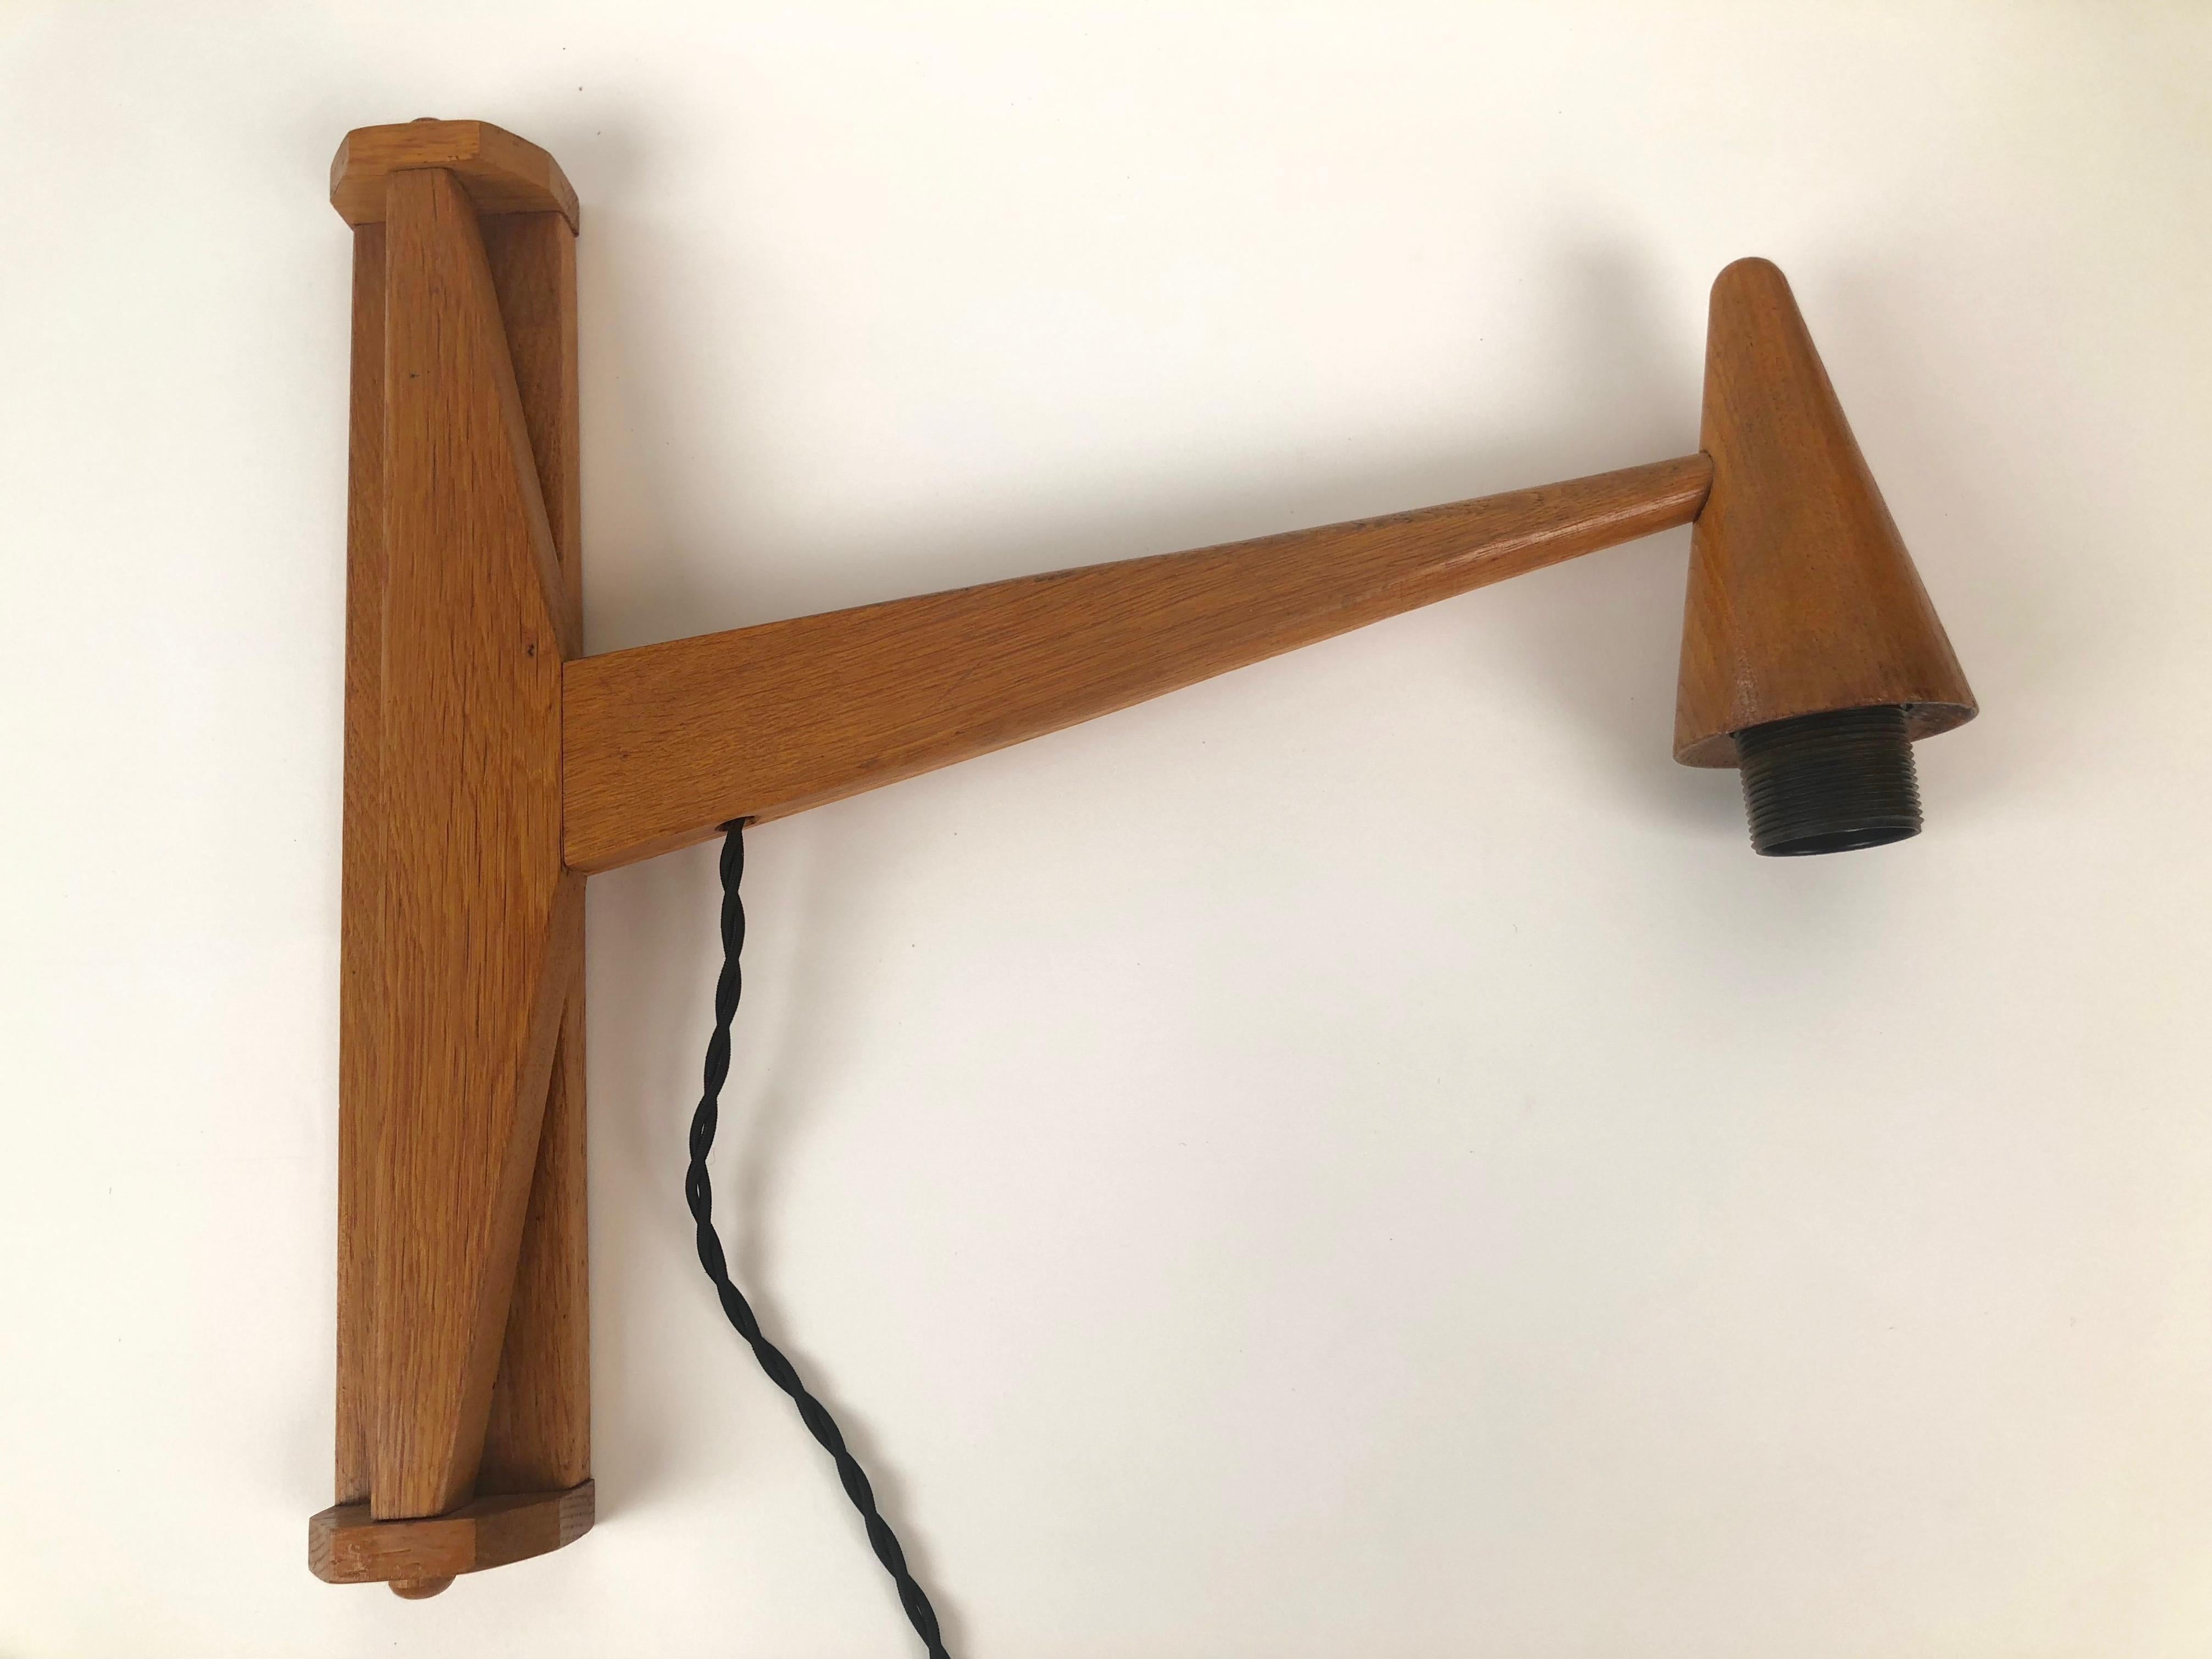 Midcentury Wooden Lamp Wall-Mounted and Rotatable, Shade in Andrew Martin Linen For Sale 1